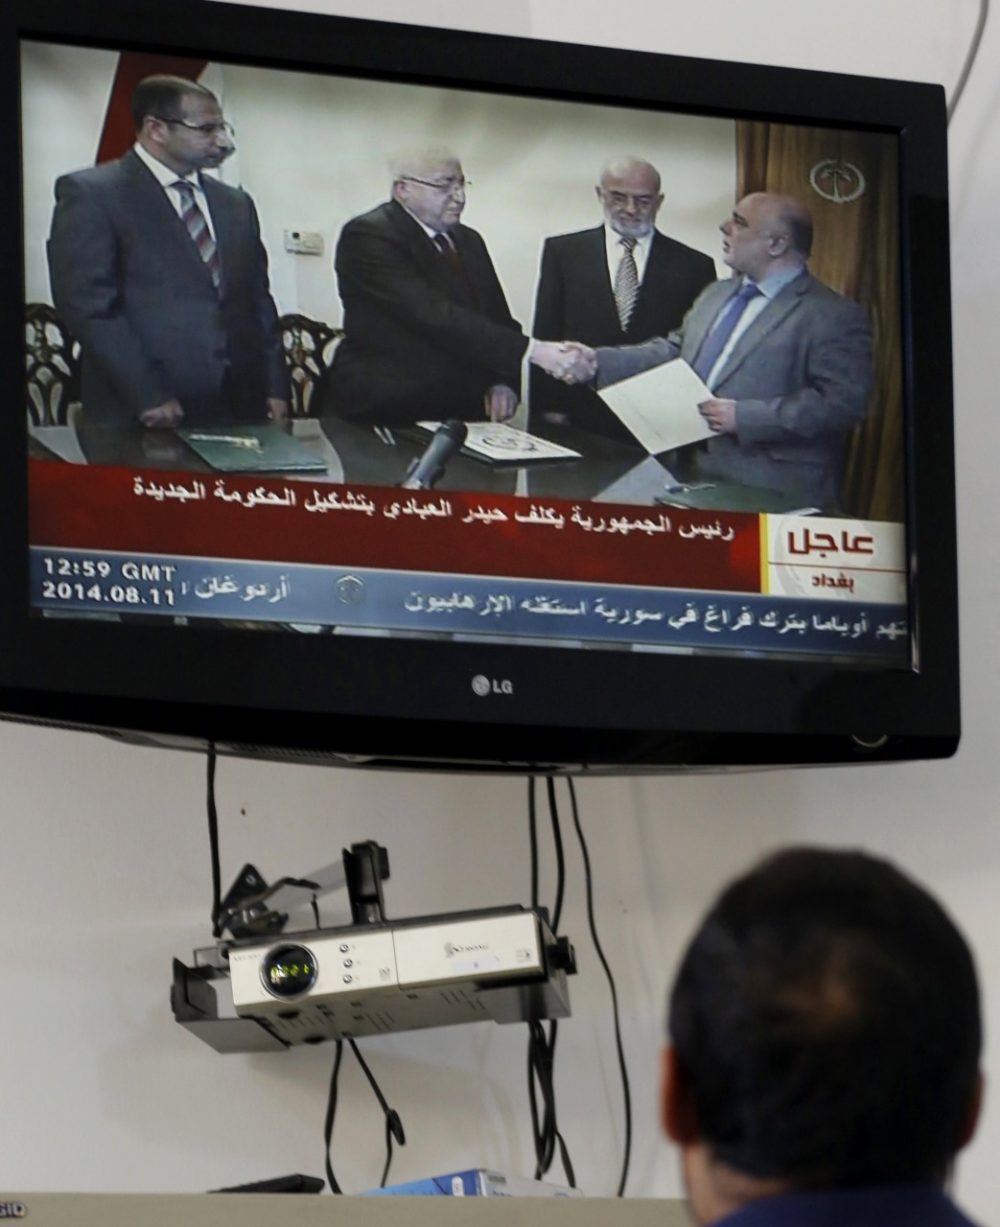 A journalist watches as Iraqi President Fuad Masum shakes hands with deputy parliamentary speaker Haidar al-Abadi, who has been tasked with forming a government, during a brief ceremony broadcast on state television on August 11, 2014, in Baghdad. (Sabah Arar/AFP/Getty Images)